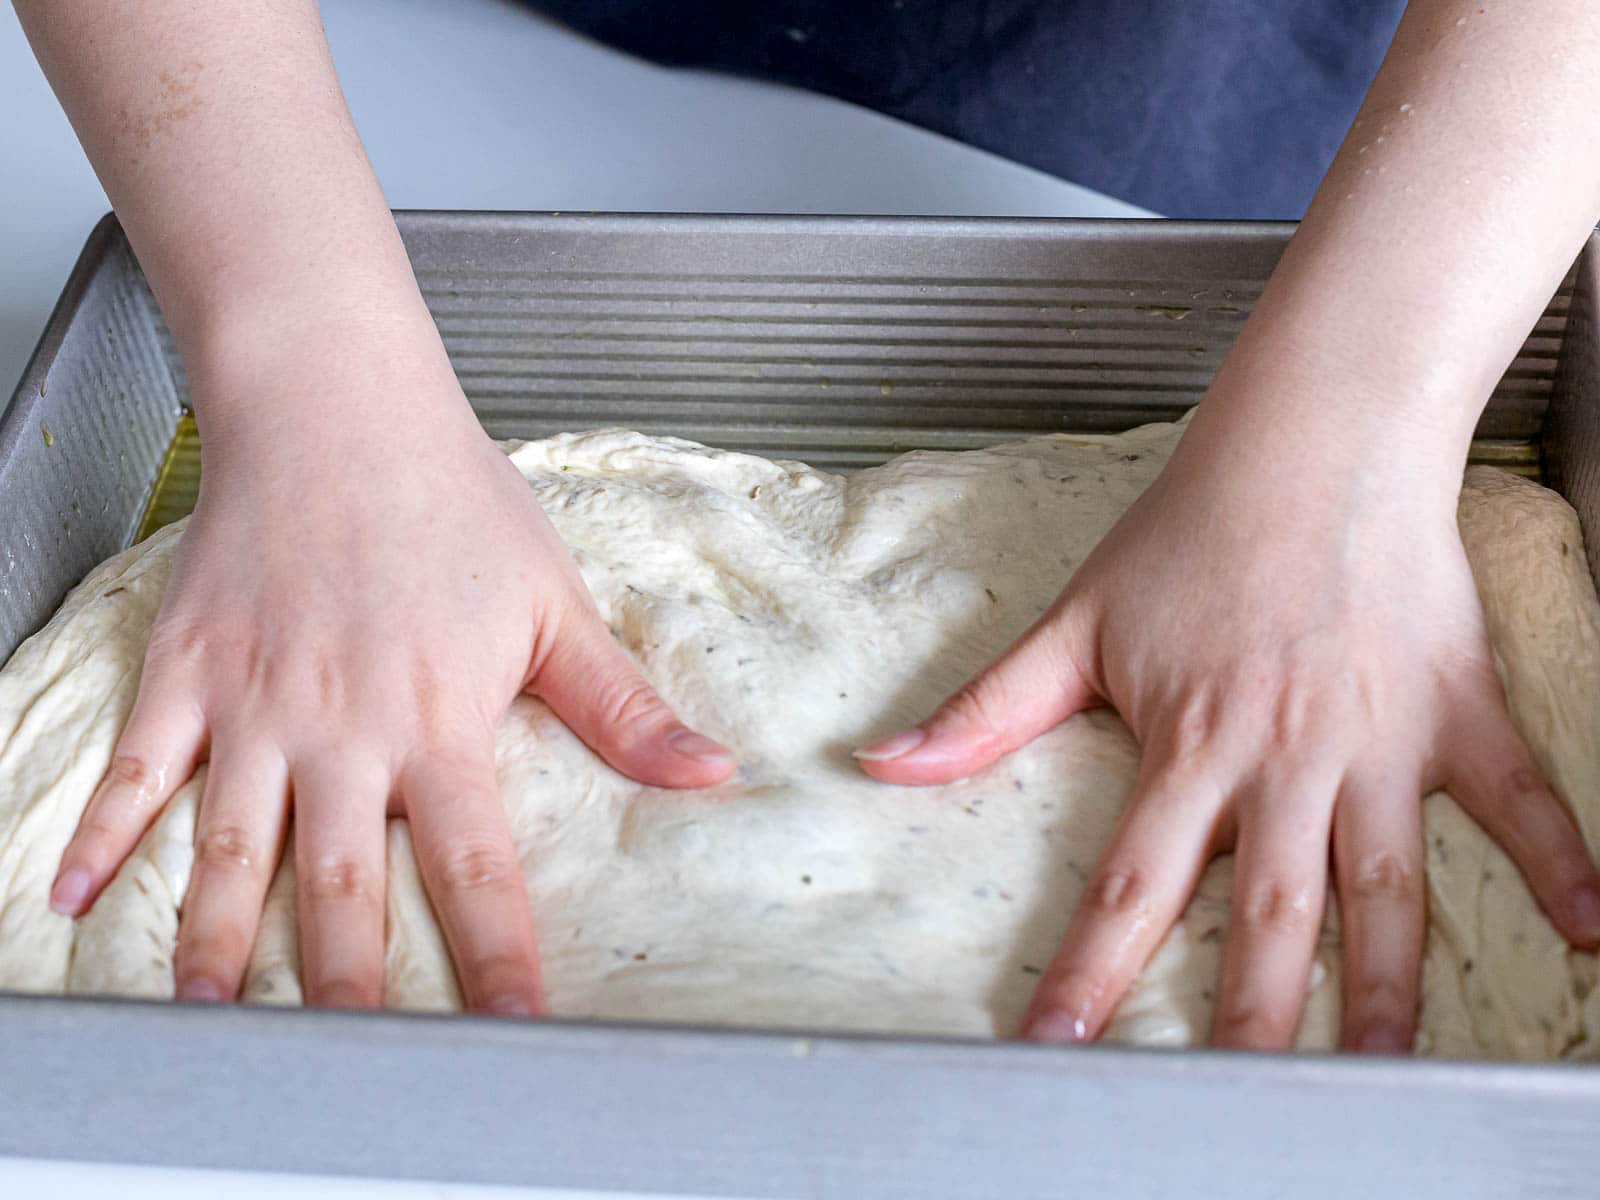 focaccia dough pressed into a baking dish with hands